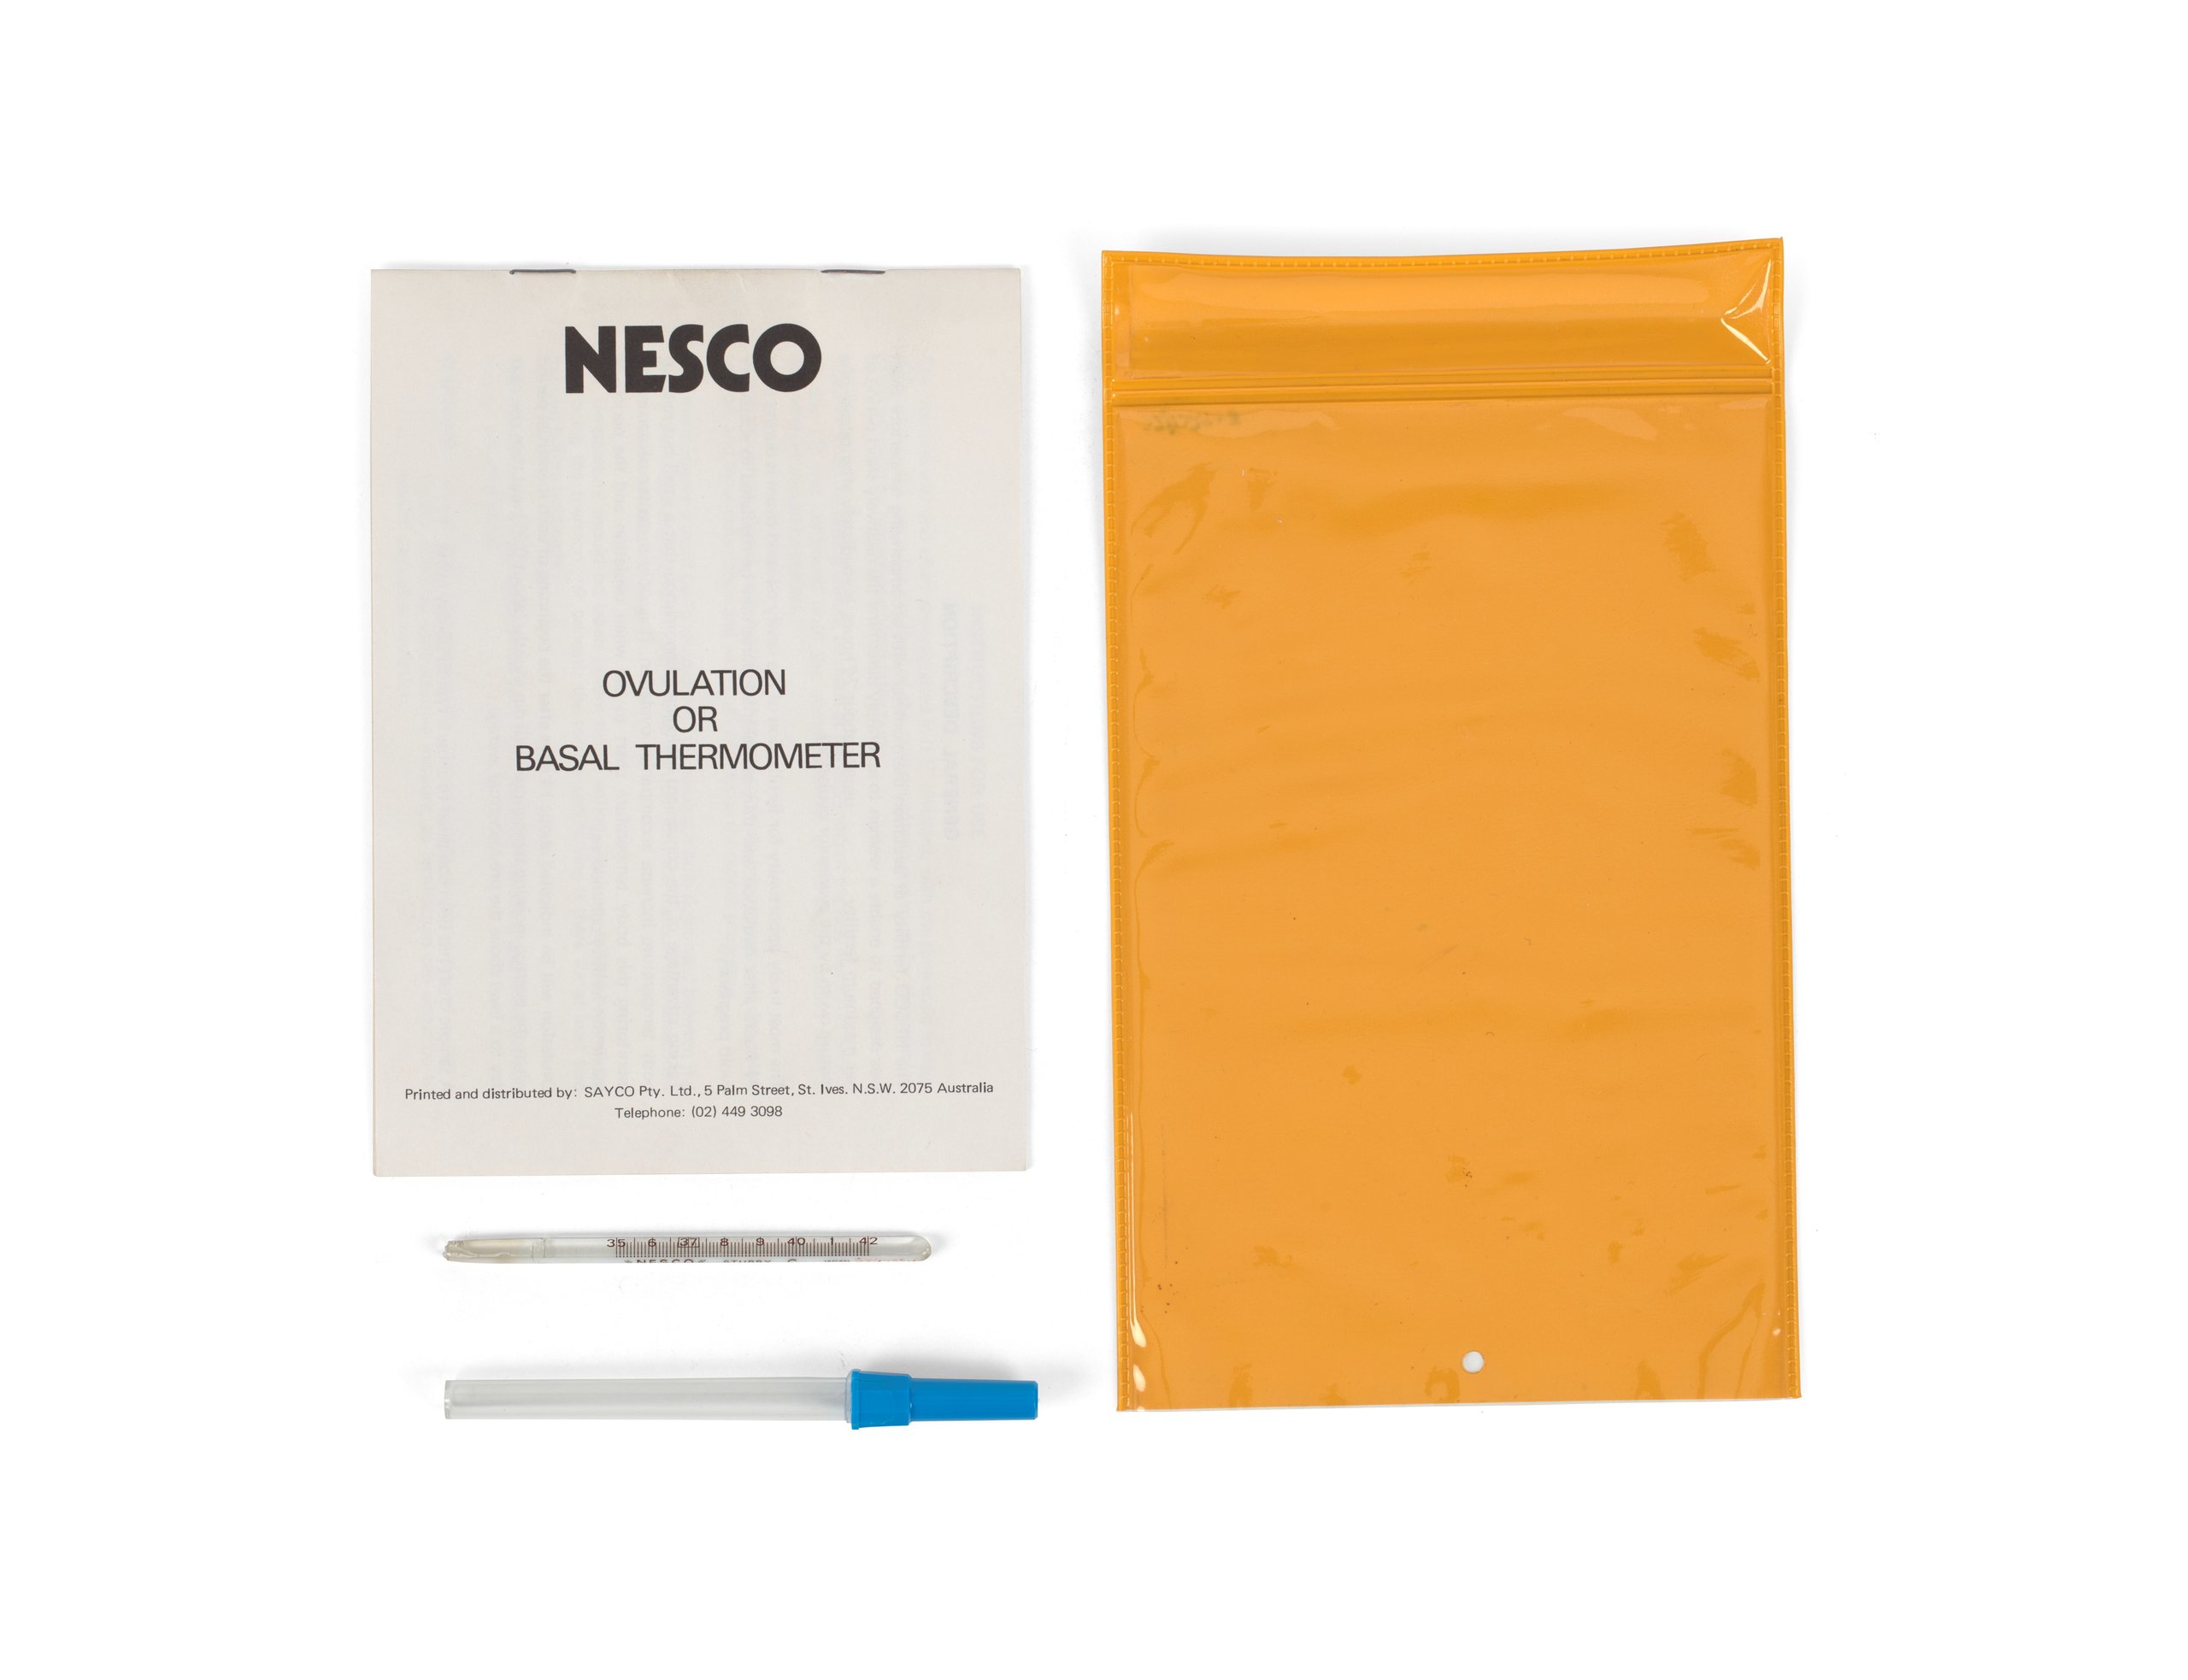 Basal thermometer for ovulation by NESCO